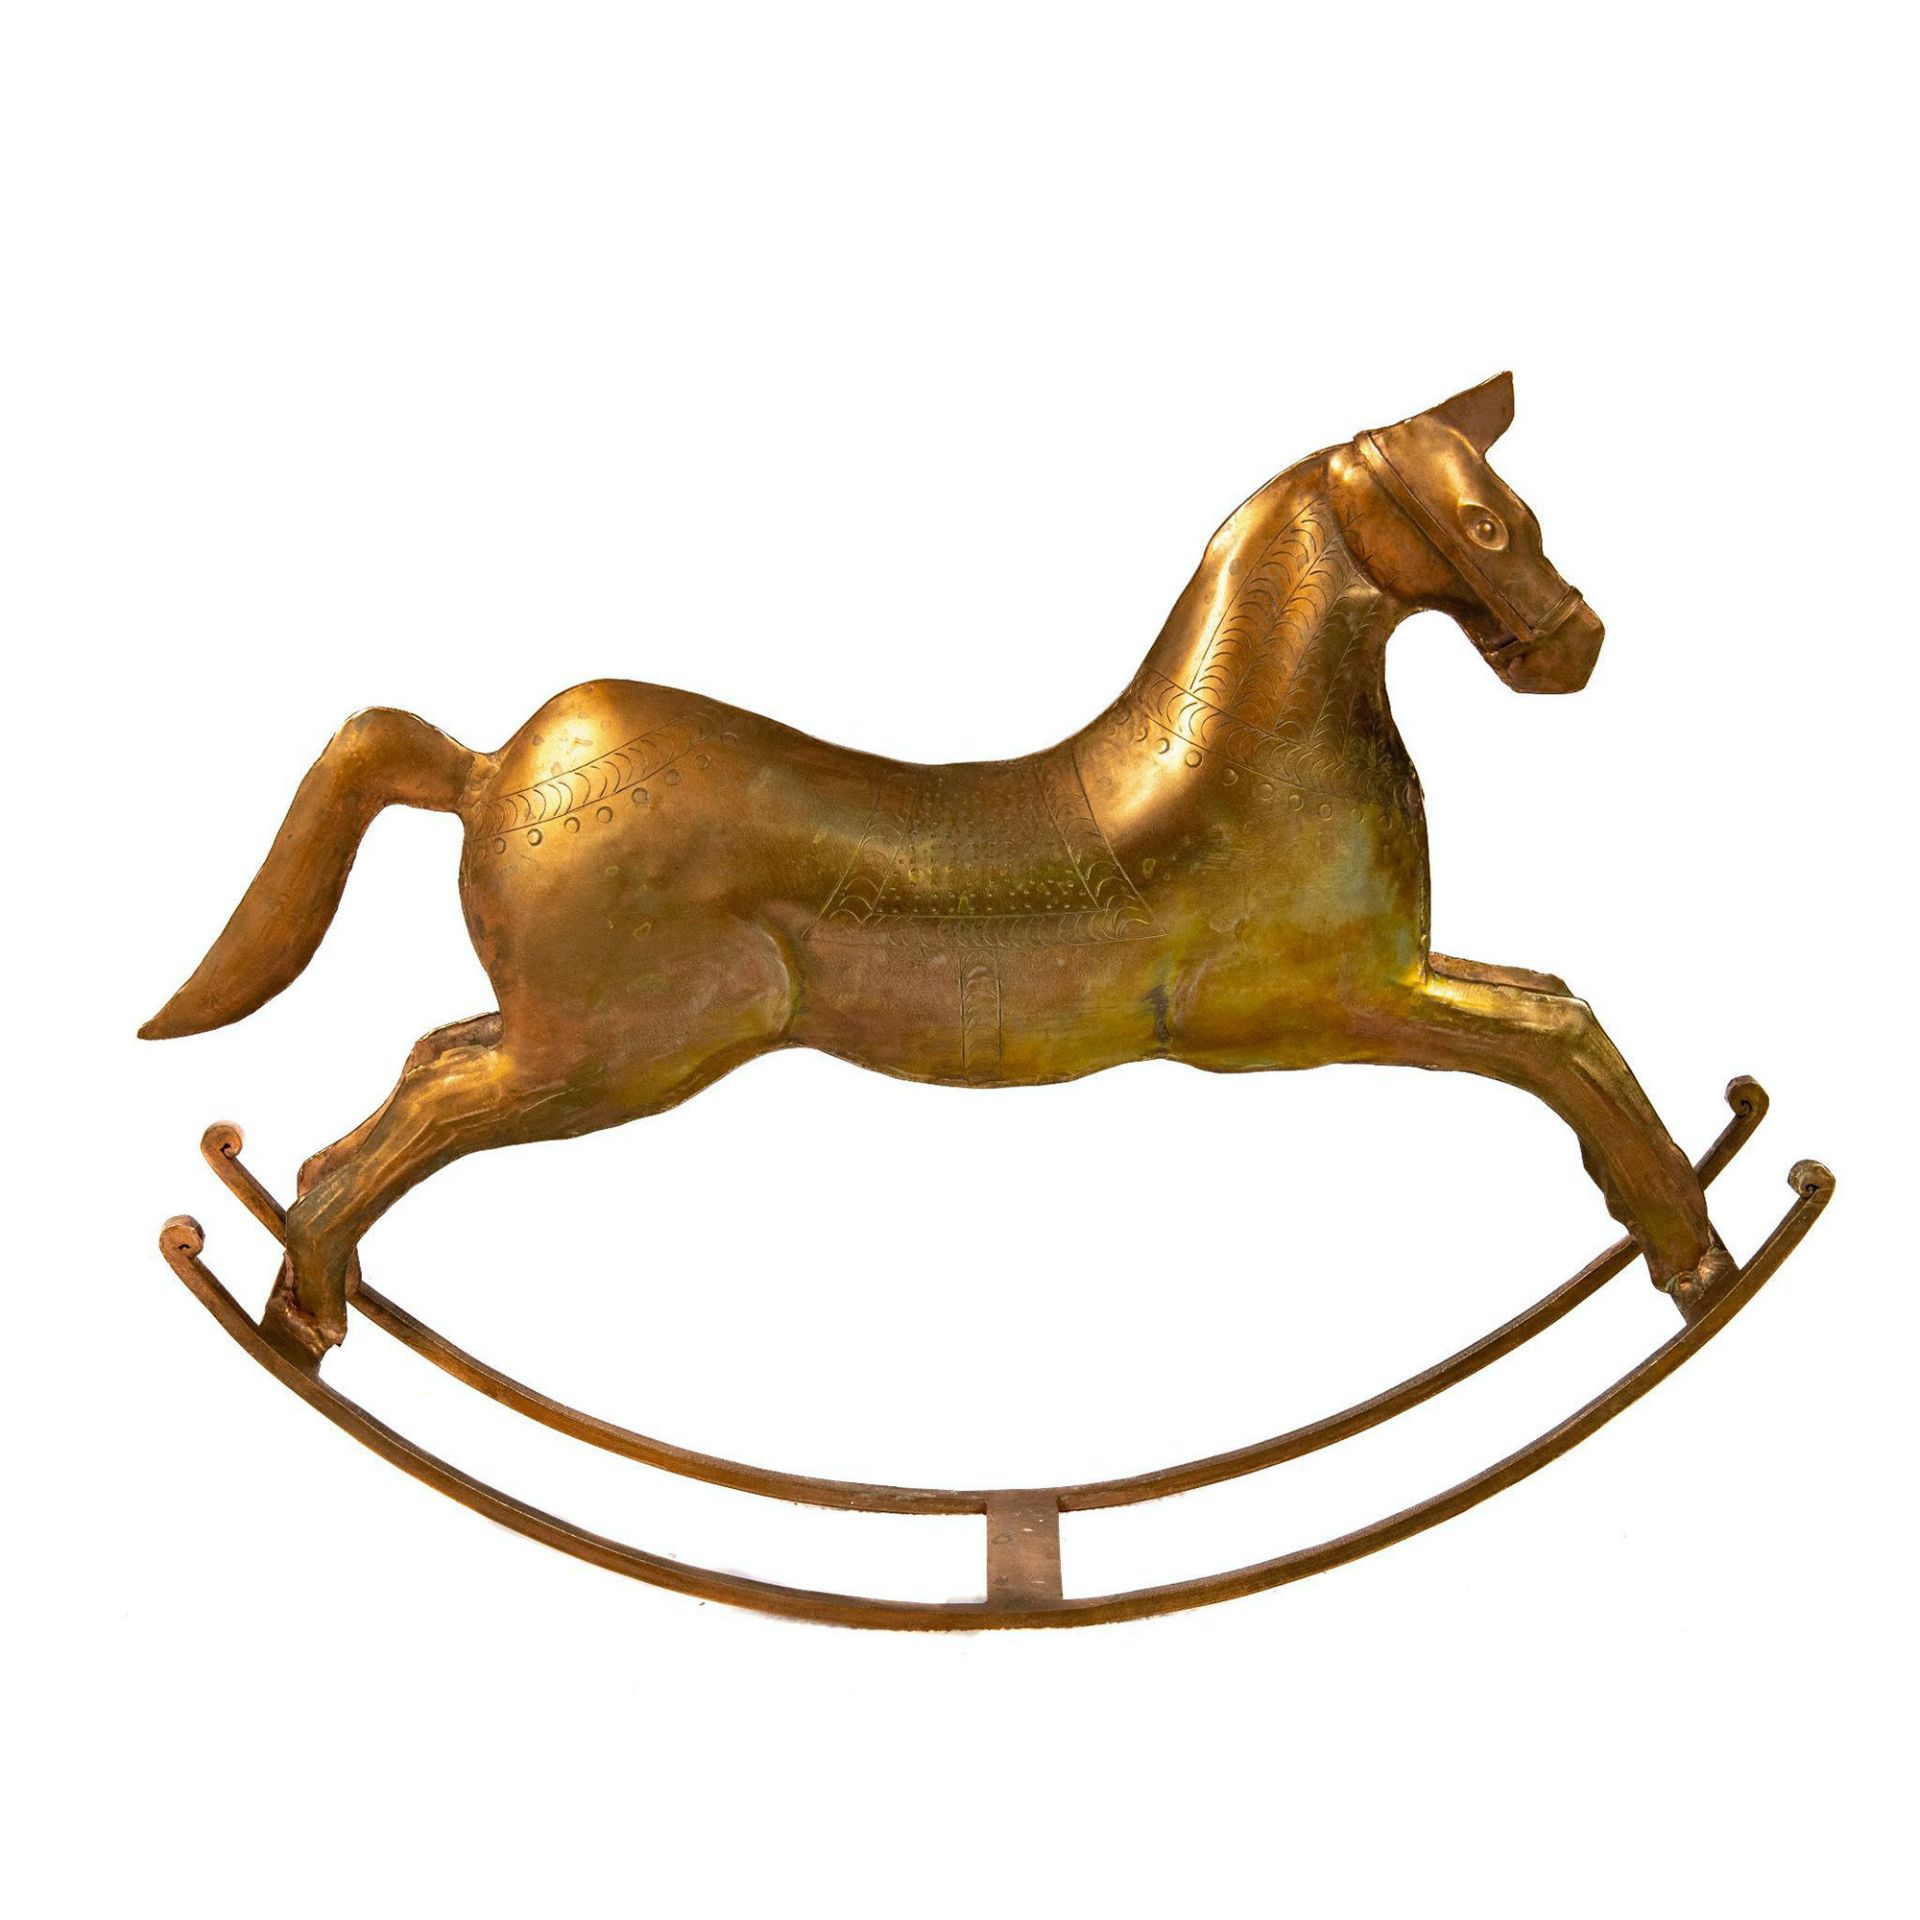 Decorative Copper Hand-Crafted Rocking Horse - Image 3 of 4